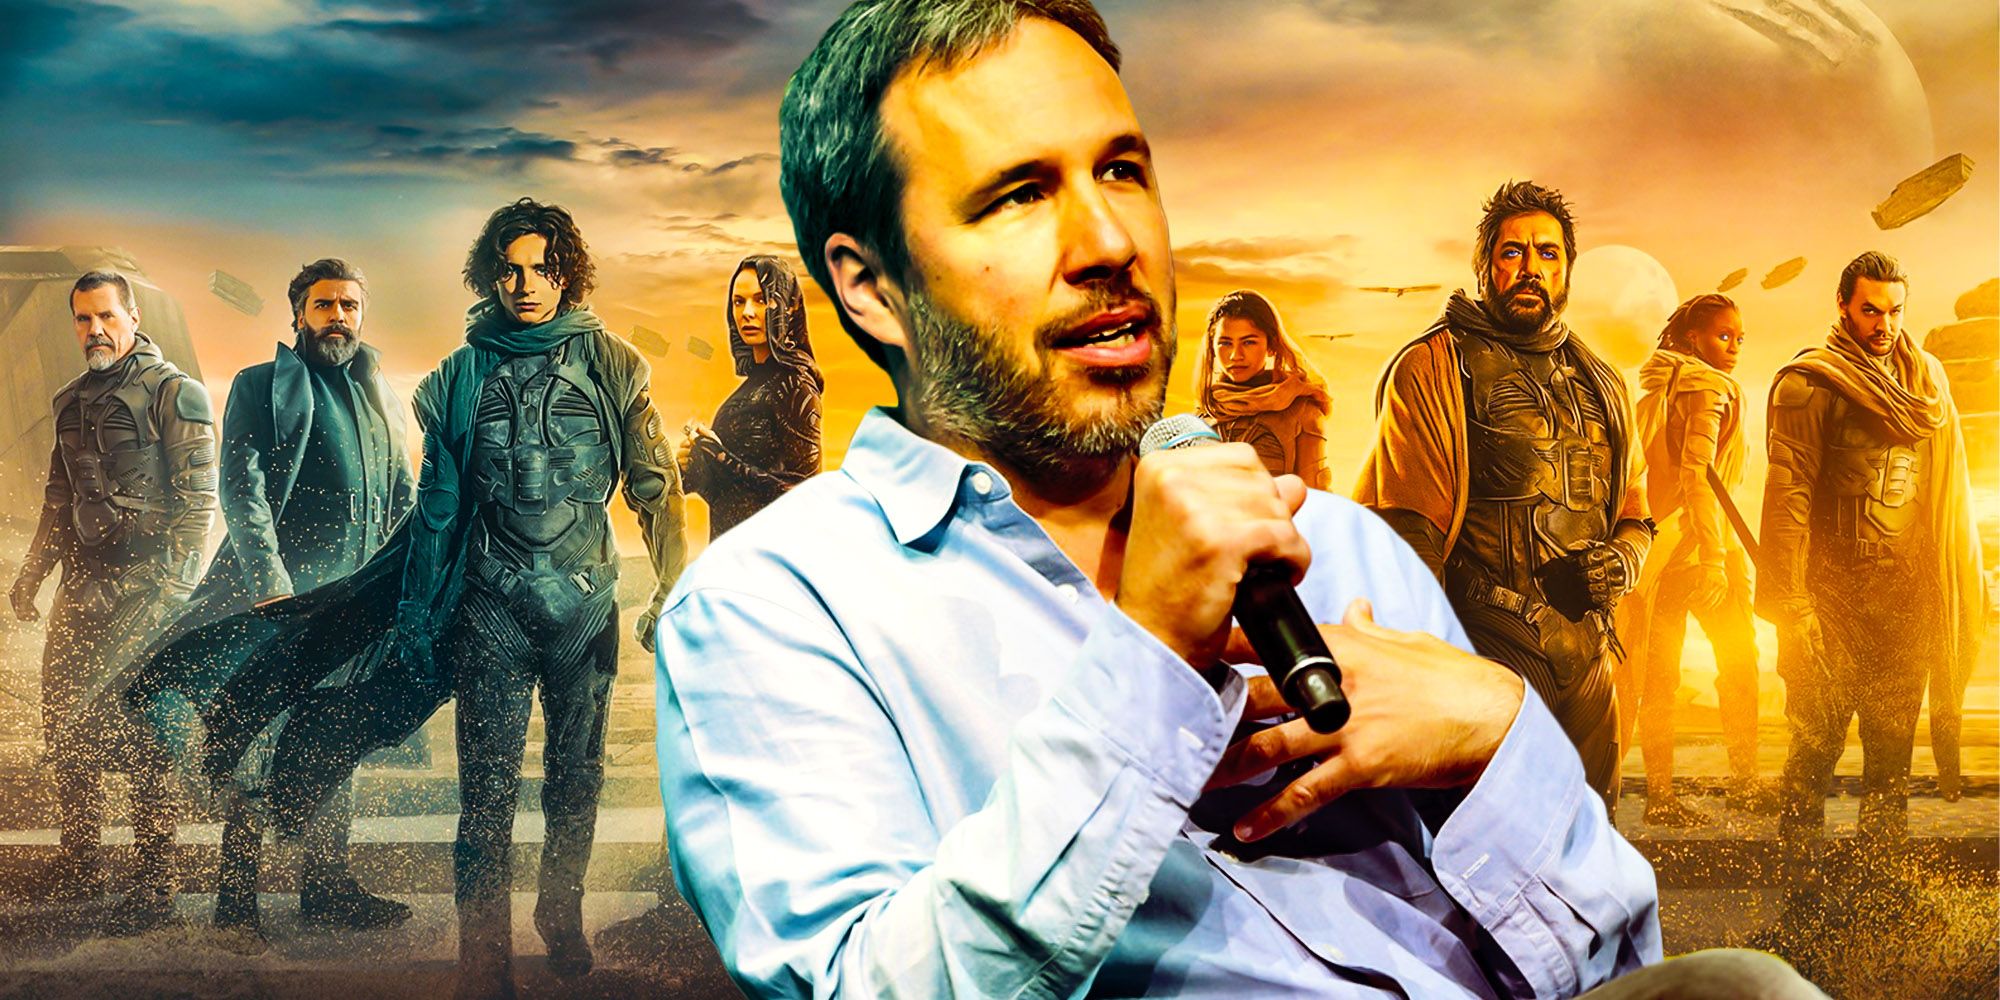 Denis Villeneuve giving interview with Dune characters poster in the background